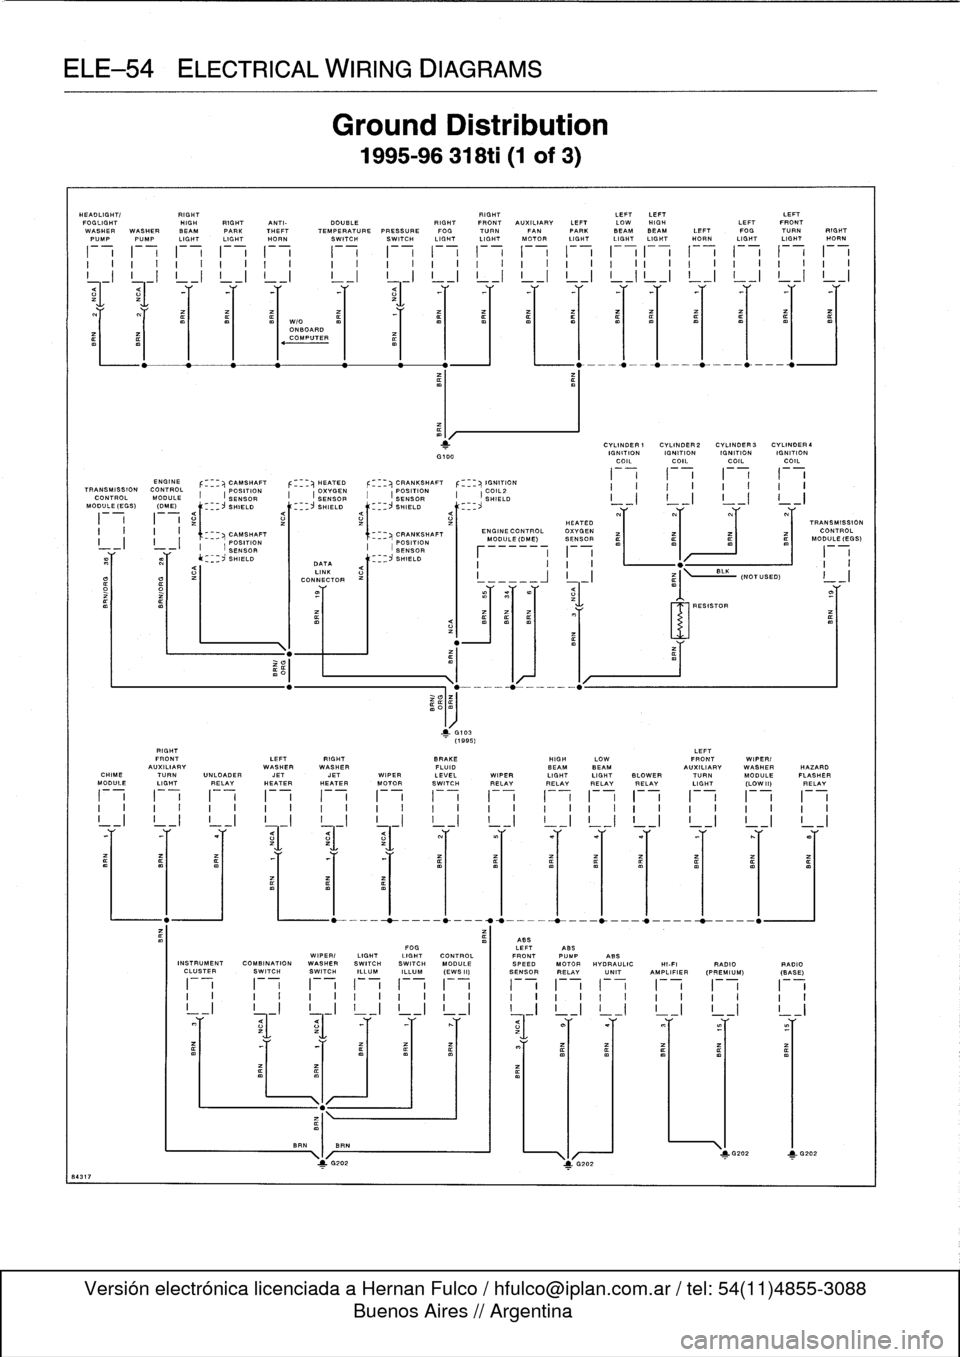 BMW 328i 1998 E36 Service Manual 
ELE-54
ELECTRICAL
WIRING
DIAGRAMS

HEADLIGHT/

	

RIGHT

	

RIGHT

	

LEFTLEFT

	

LEFT
FOGLIGHT

	

HIGH
RIGHT
ANTI-

	

DOUBLE

	

RIGHT
FRONT
AUXILIARY
LEFT
LOW
HIGH

	

LEFT
FRONT
WASHER
WASHER
B